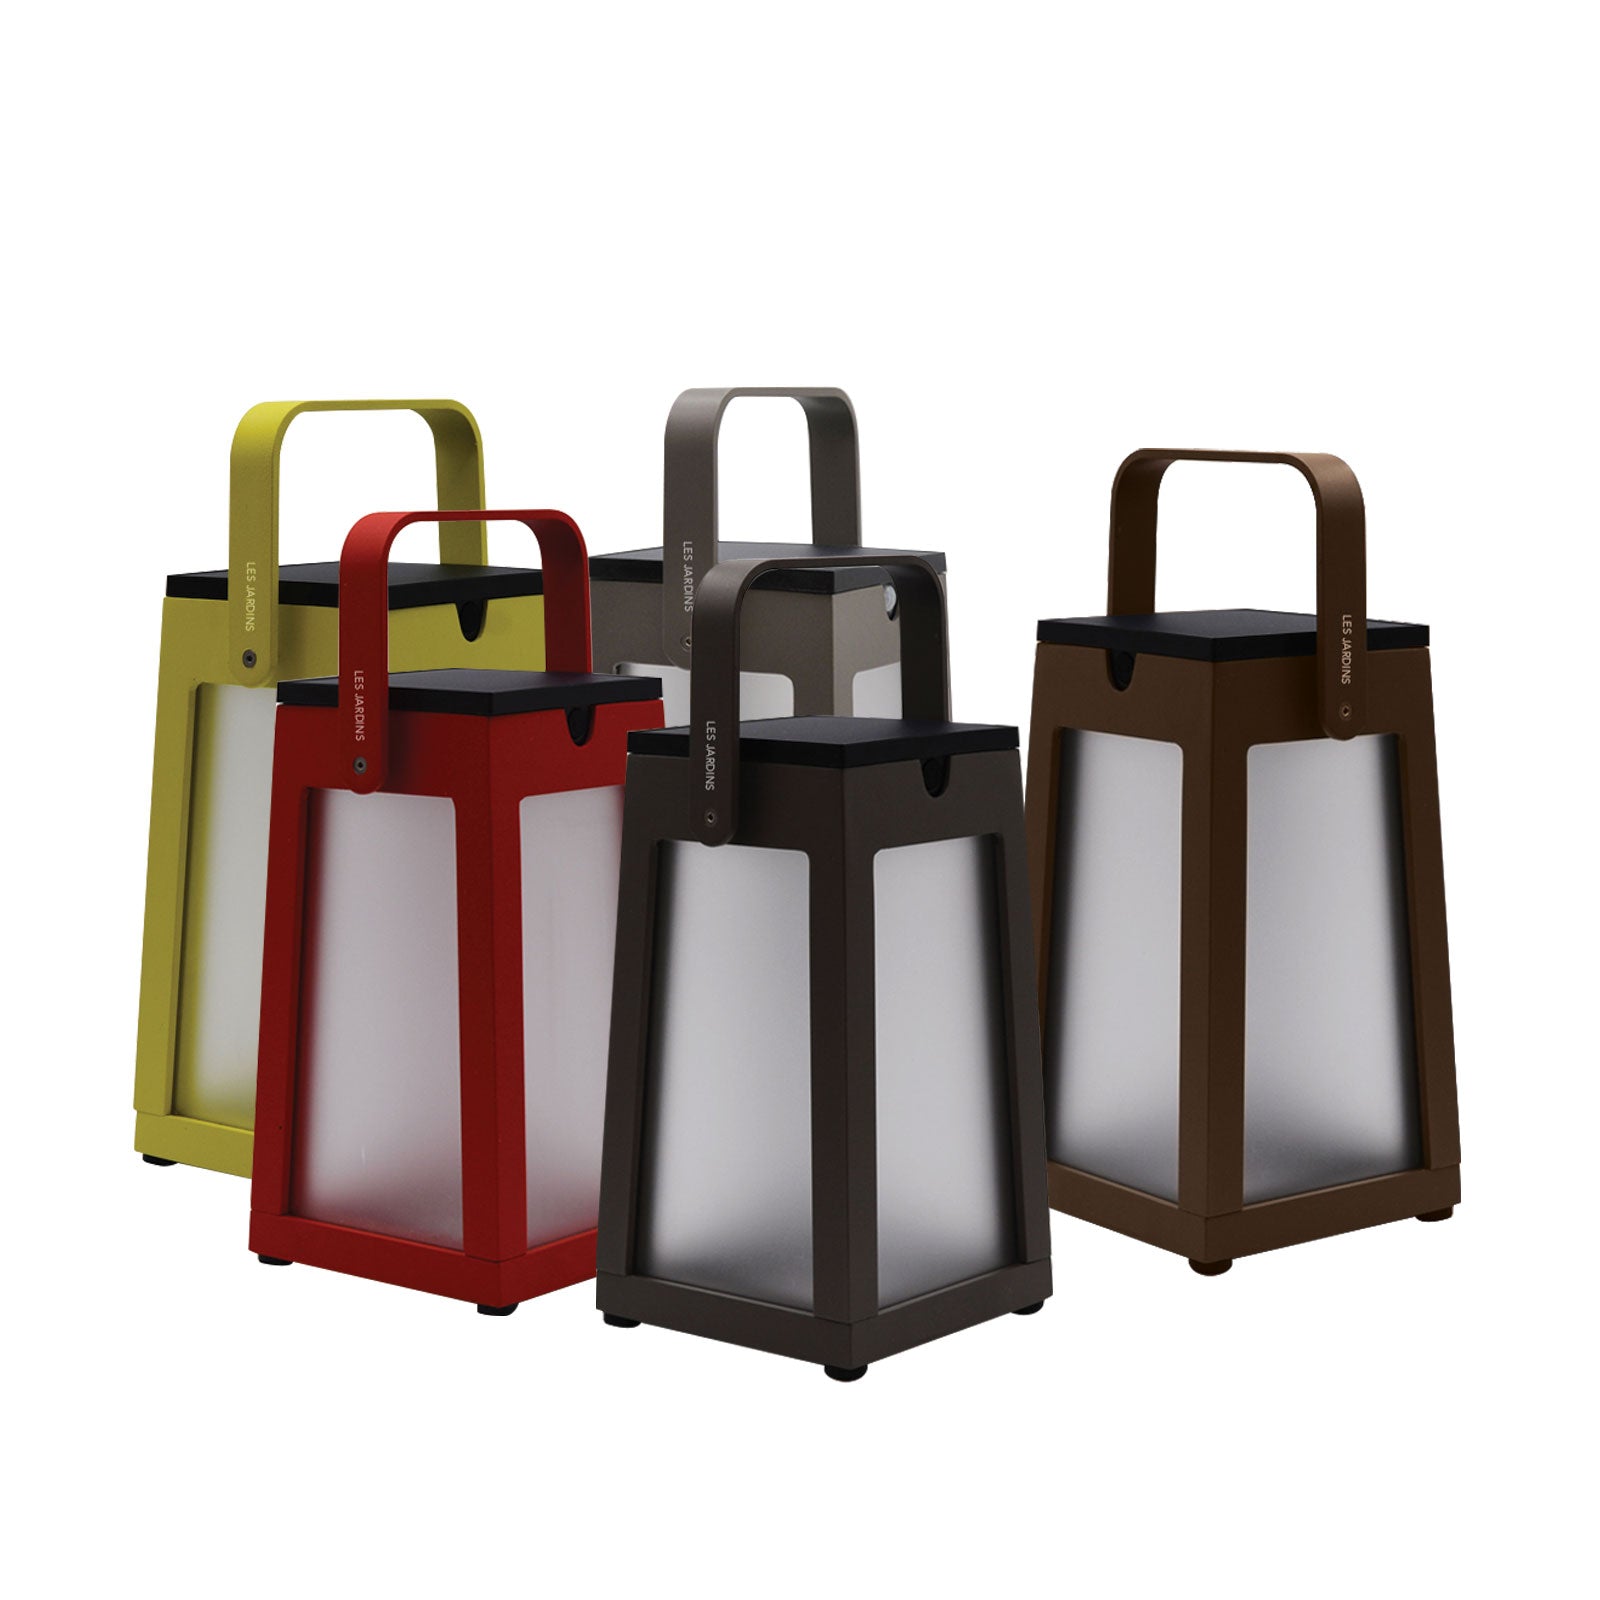 A group of Tinka lantern in red, citrus, graphite, corten, taupe color